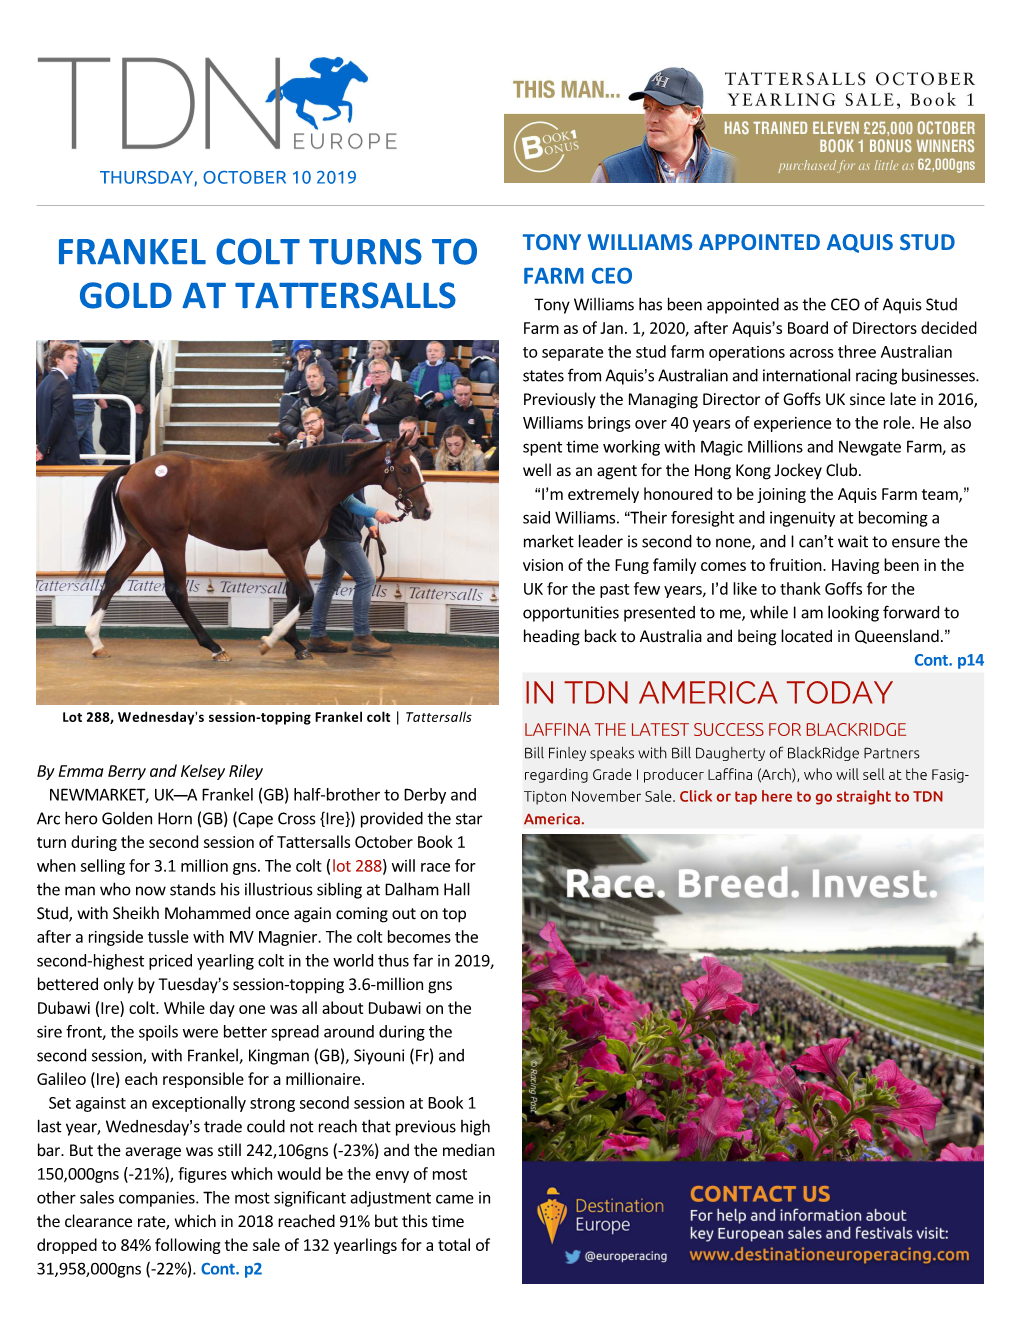 Frankel Colt Turns to Gold at Tattersalls